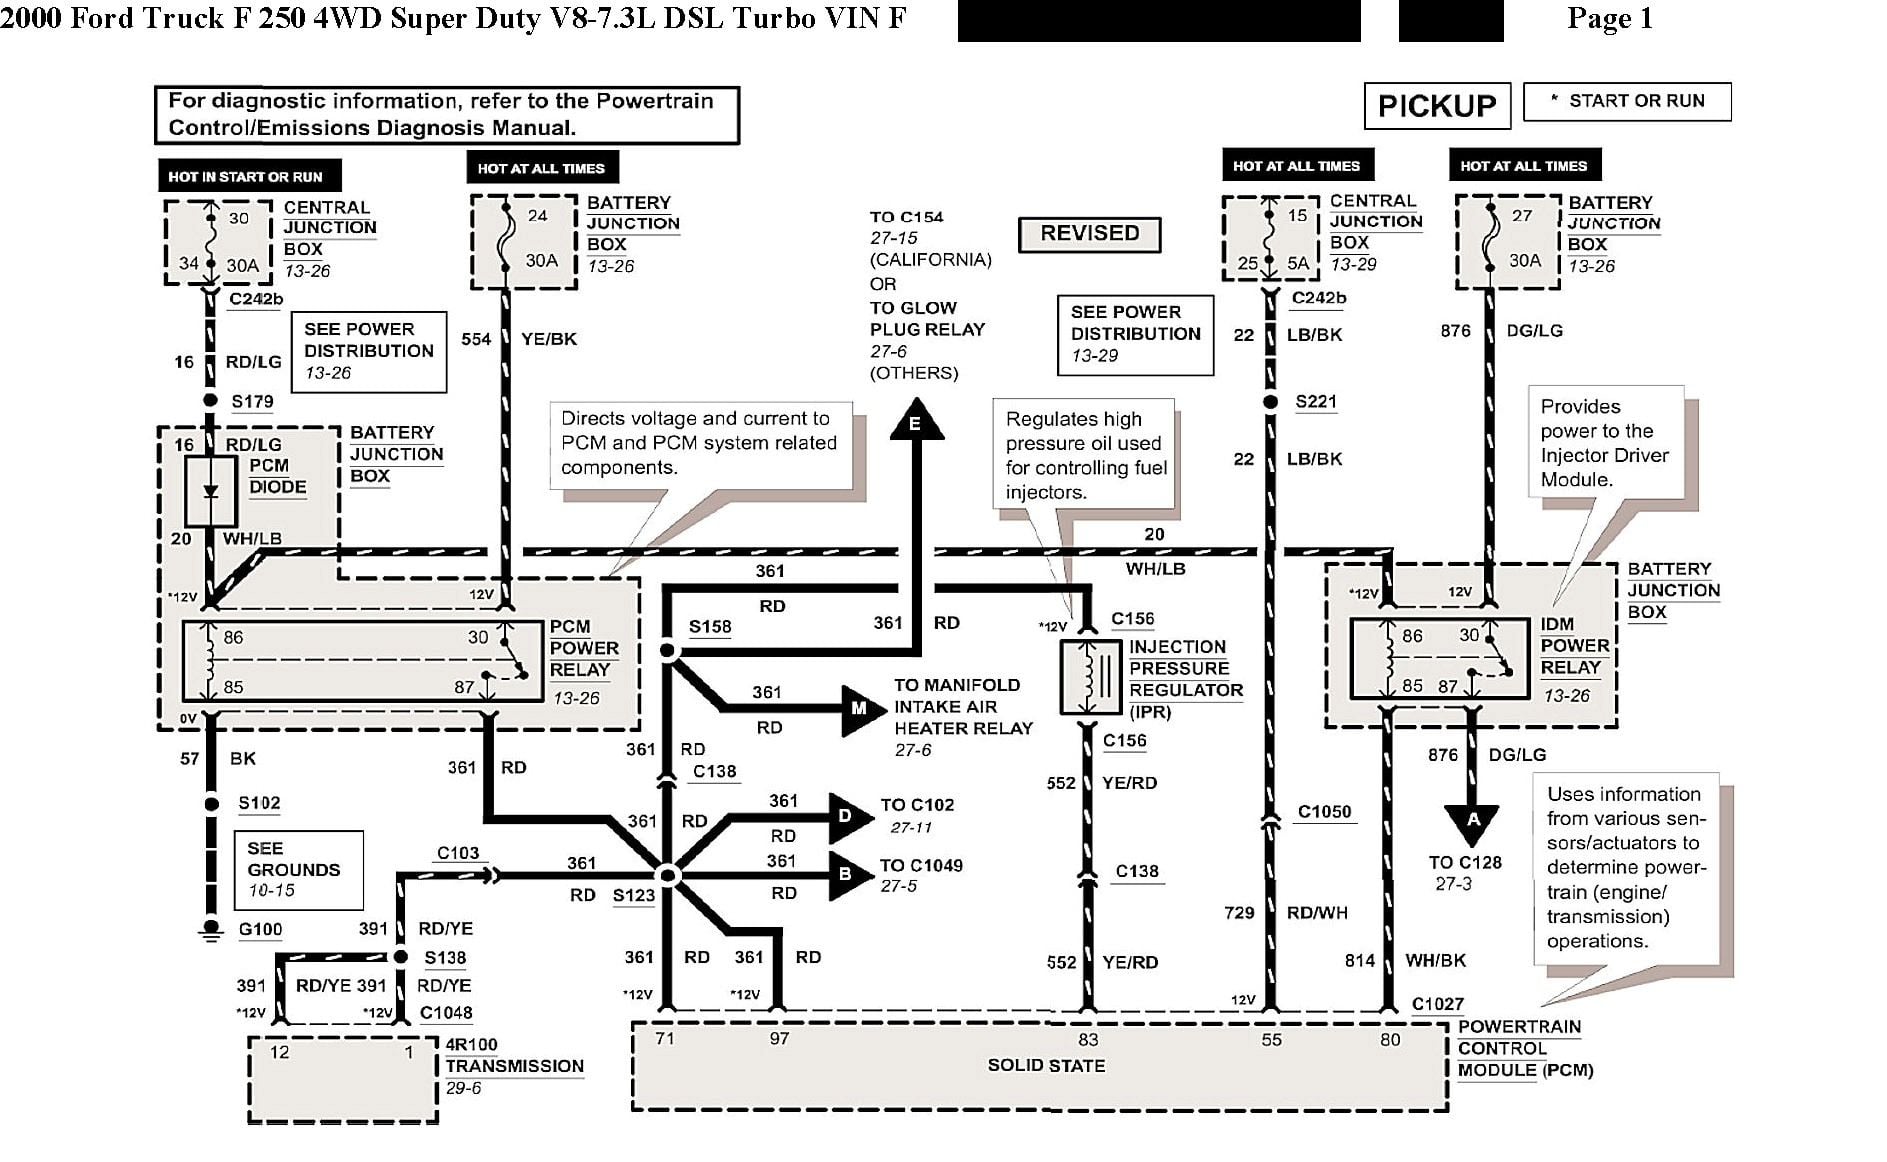 Need IPR wiring info-diagram, quickly please (2000) - Ford Truck  Enthusiasts Forums  2003 Ford F250 Diesel Wiring Diagram    Ford Truck Enthusiasts